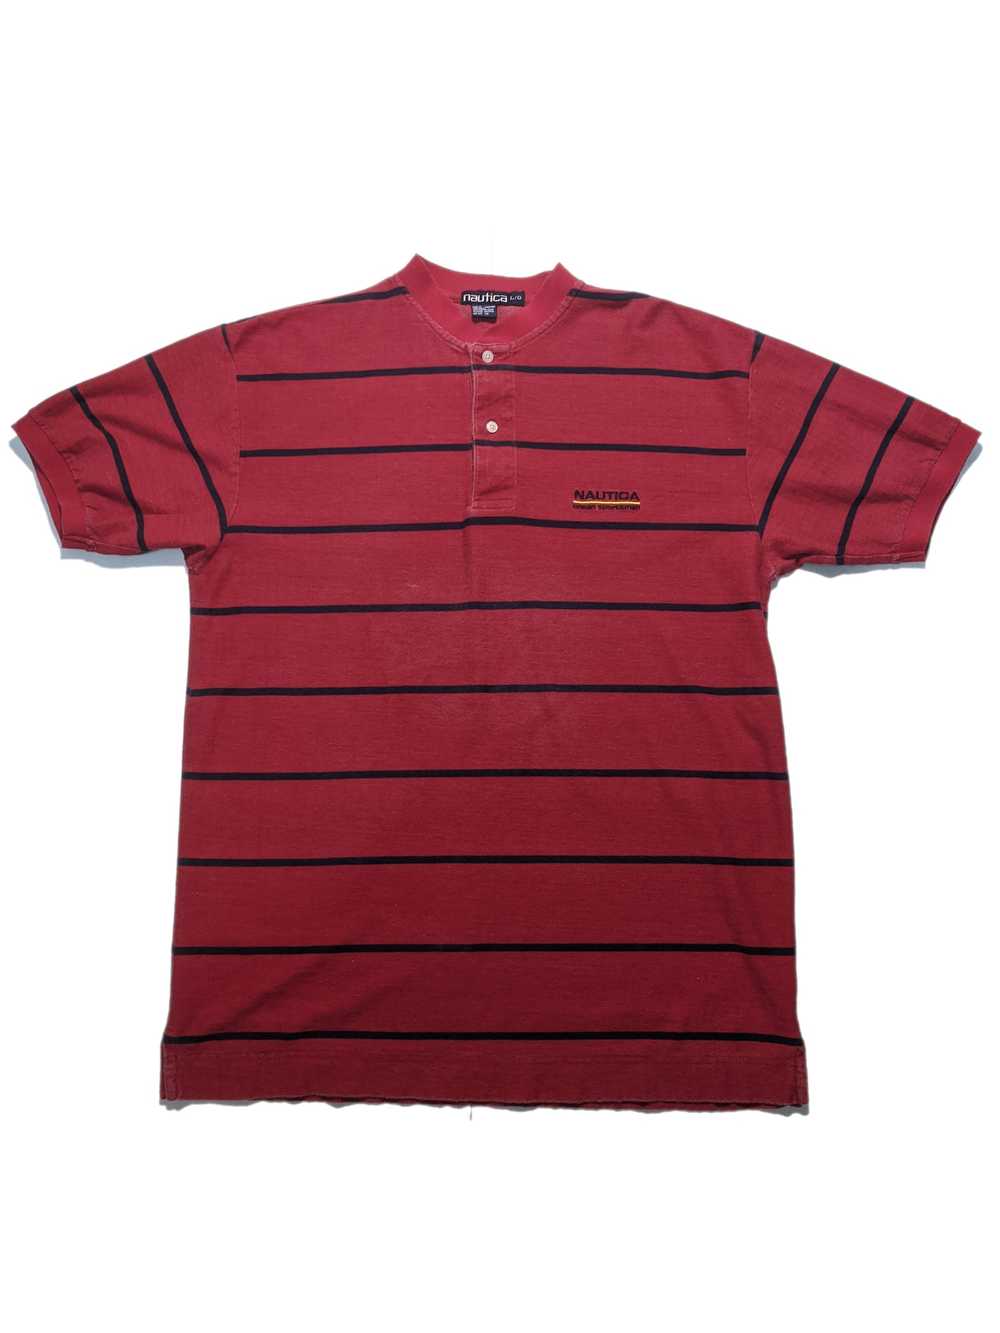 Nautica Large Red Vintage 1990s Striped Embroider… - image 1